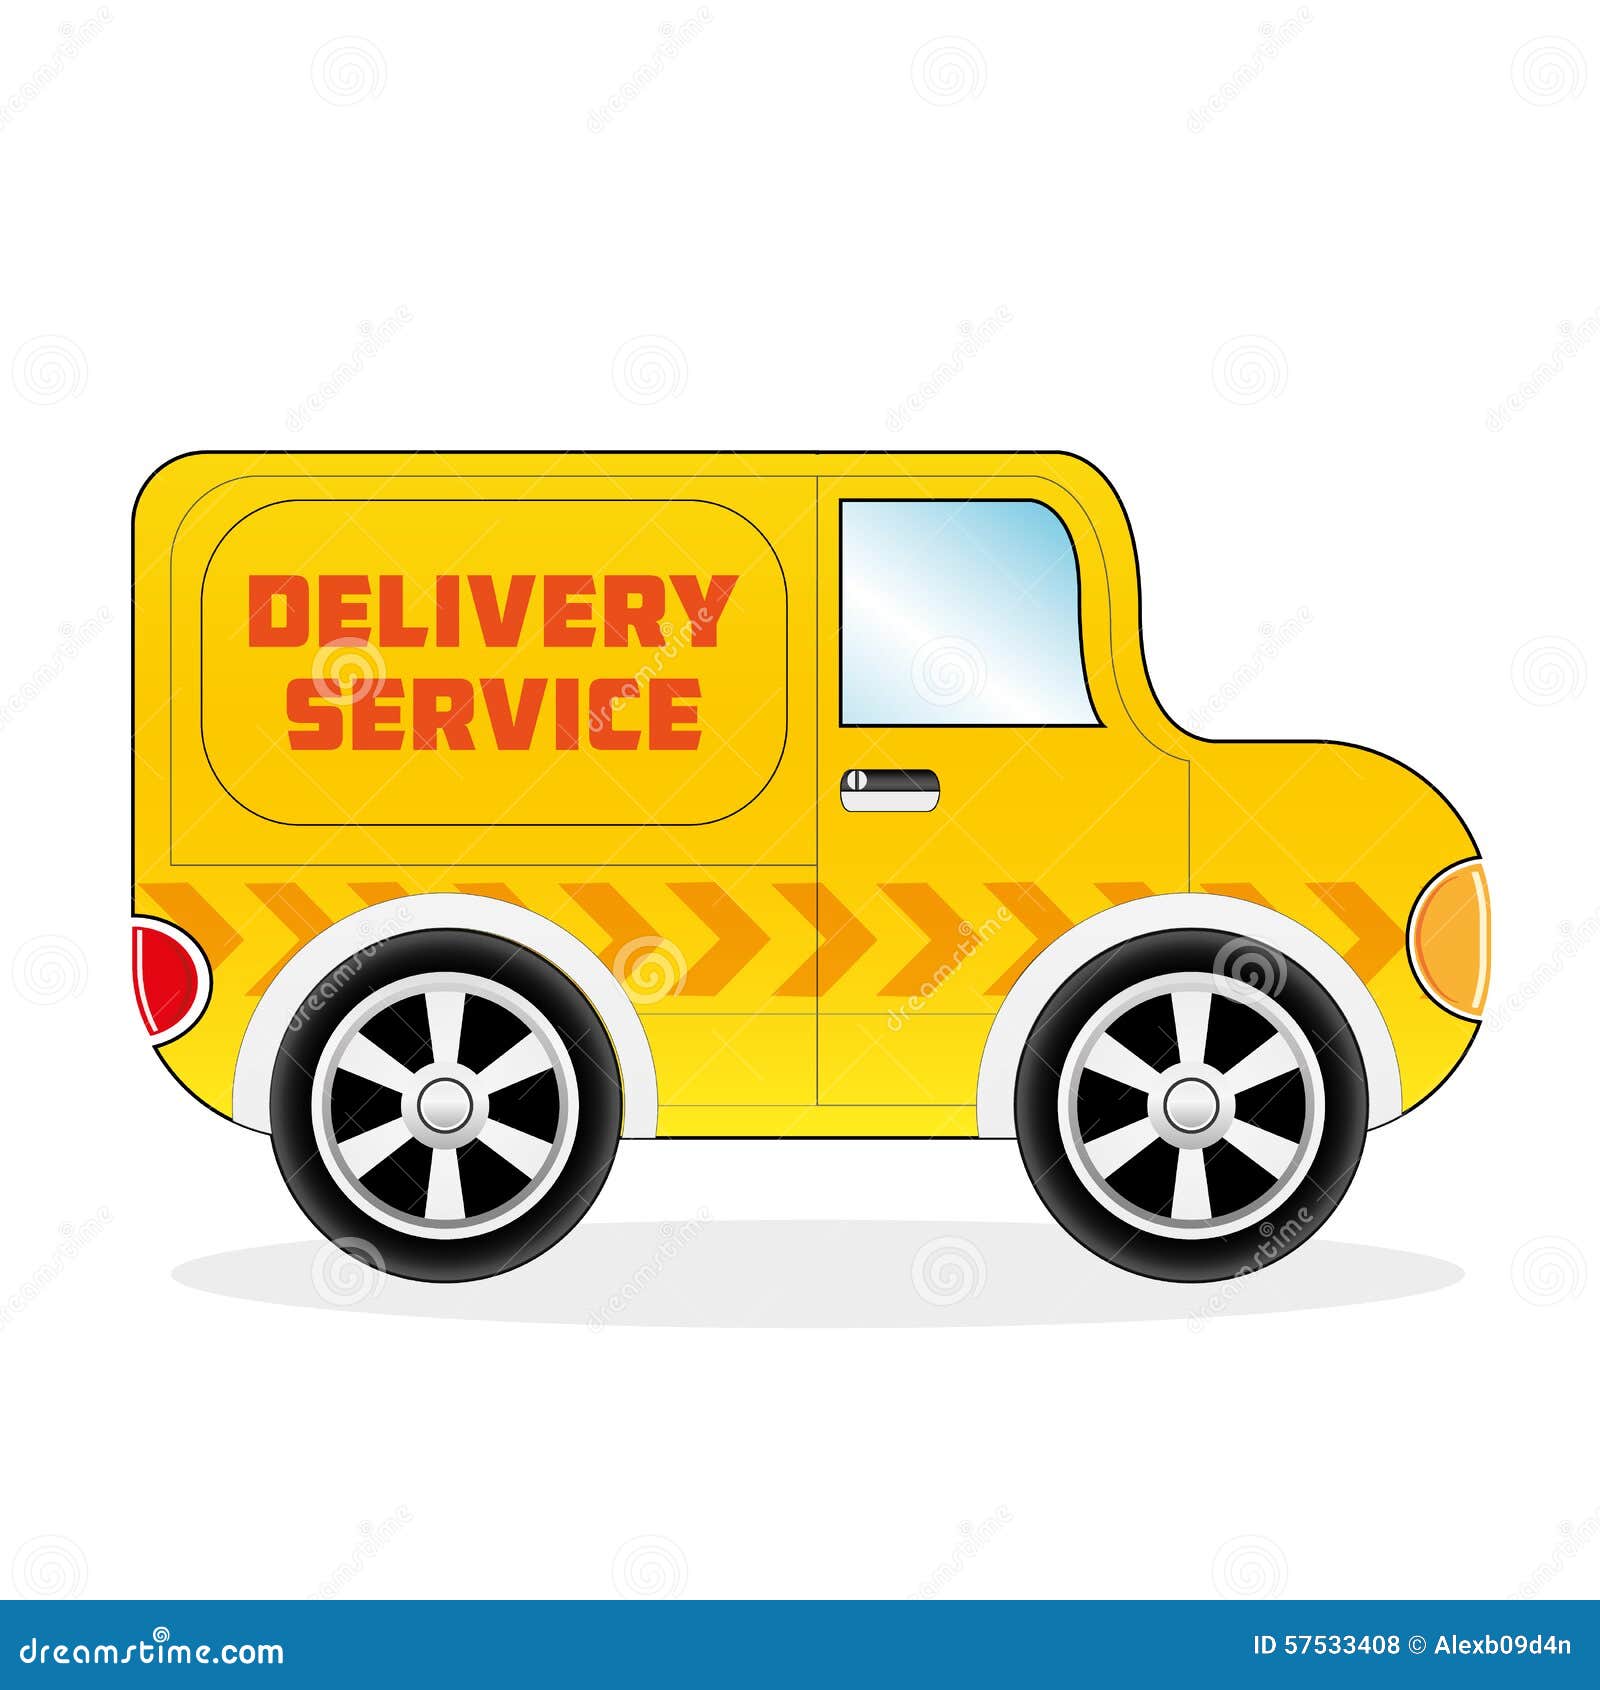 delivery vehicle clip art - photo #32